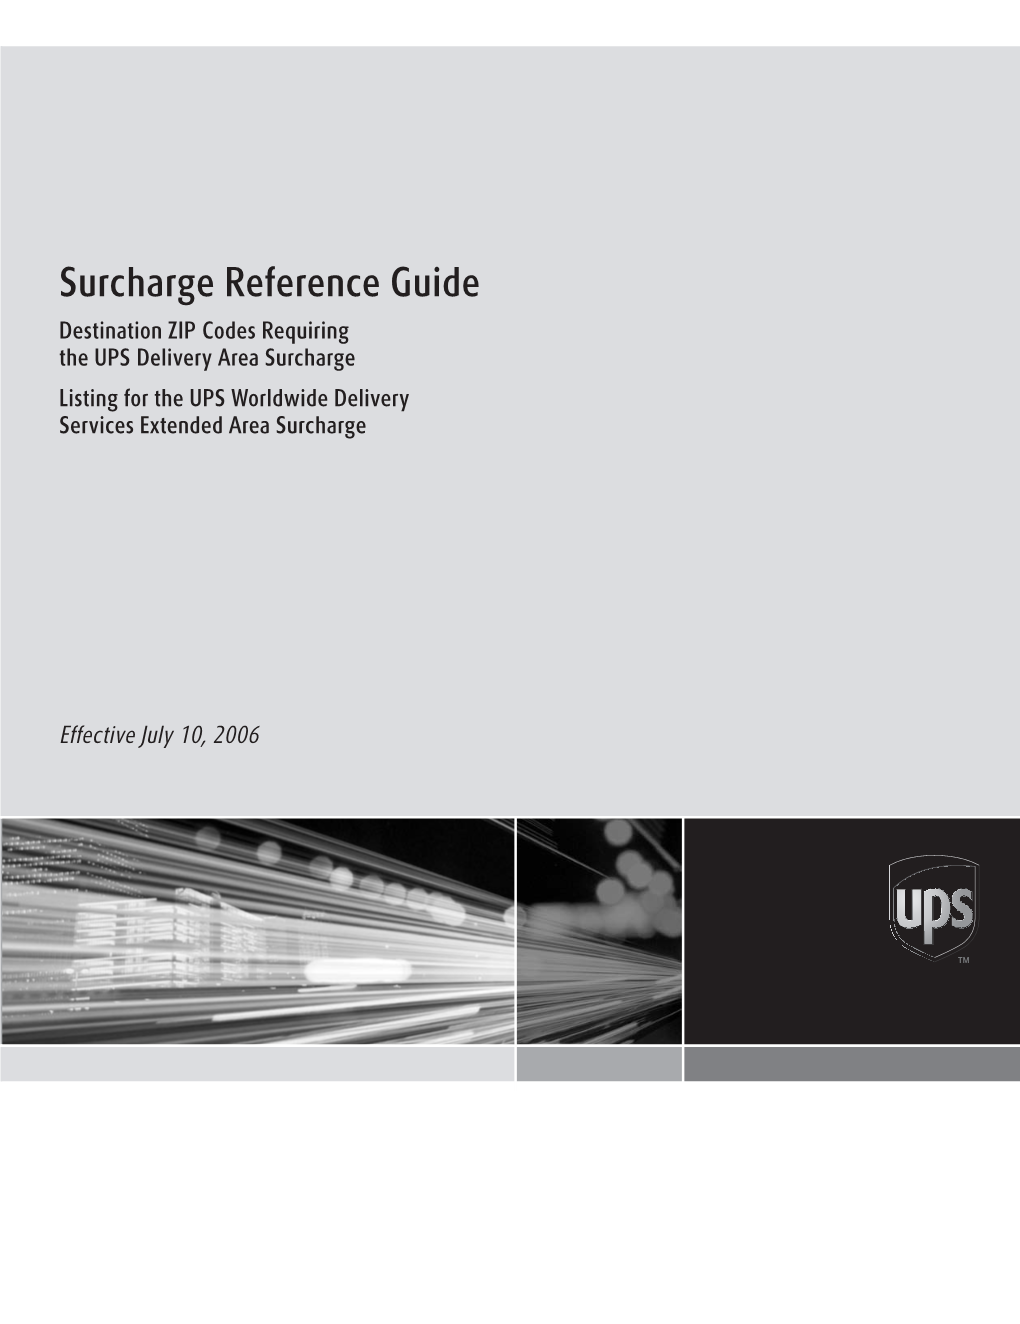 Surcharge Reference Guide Destination ZIP Codes Requiring the UPS Delivery Area Surcharge Listing for the UPS Worldwide Delivery Services Extended Area Surcharge